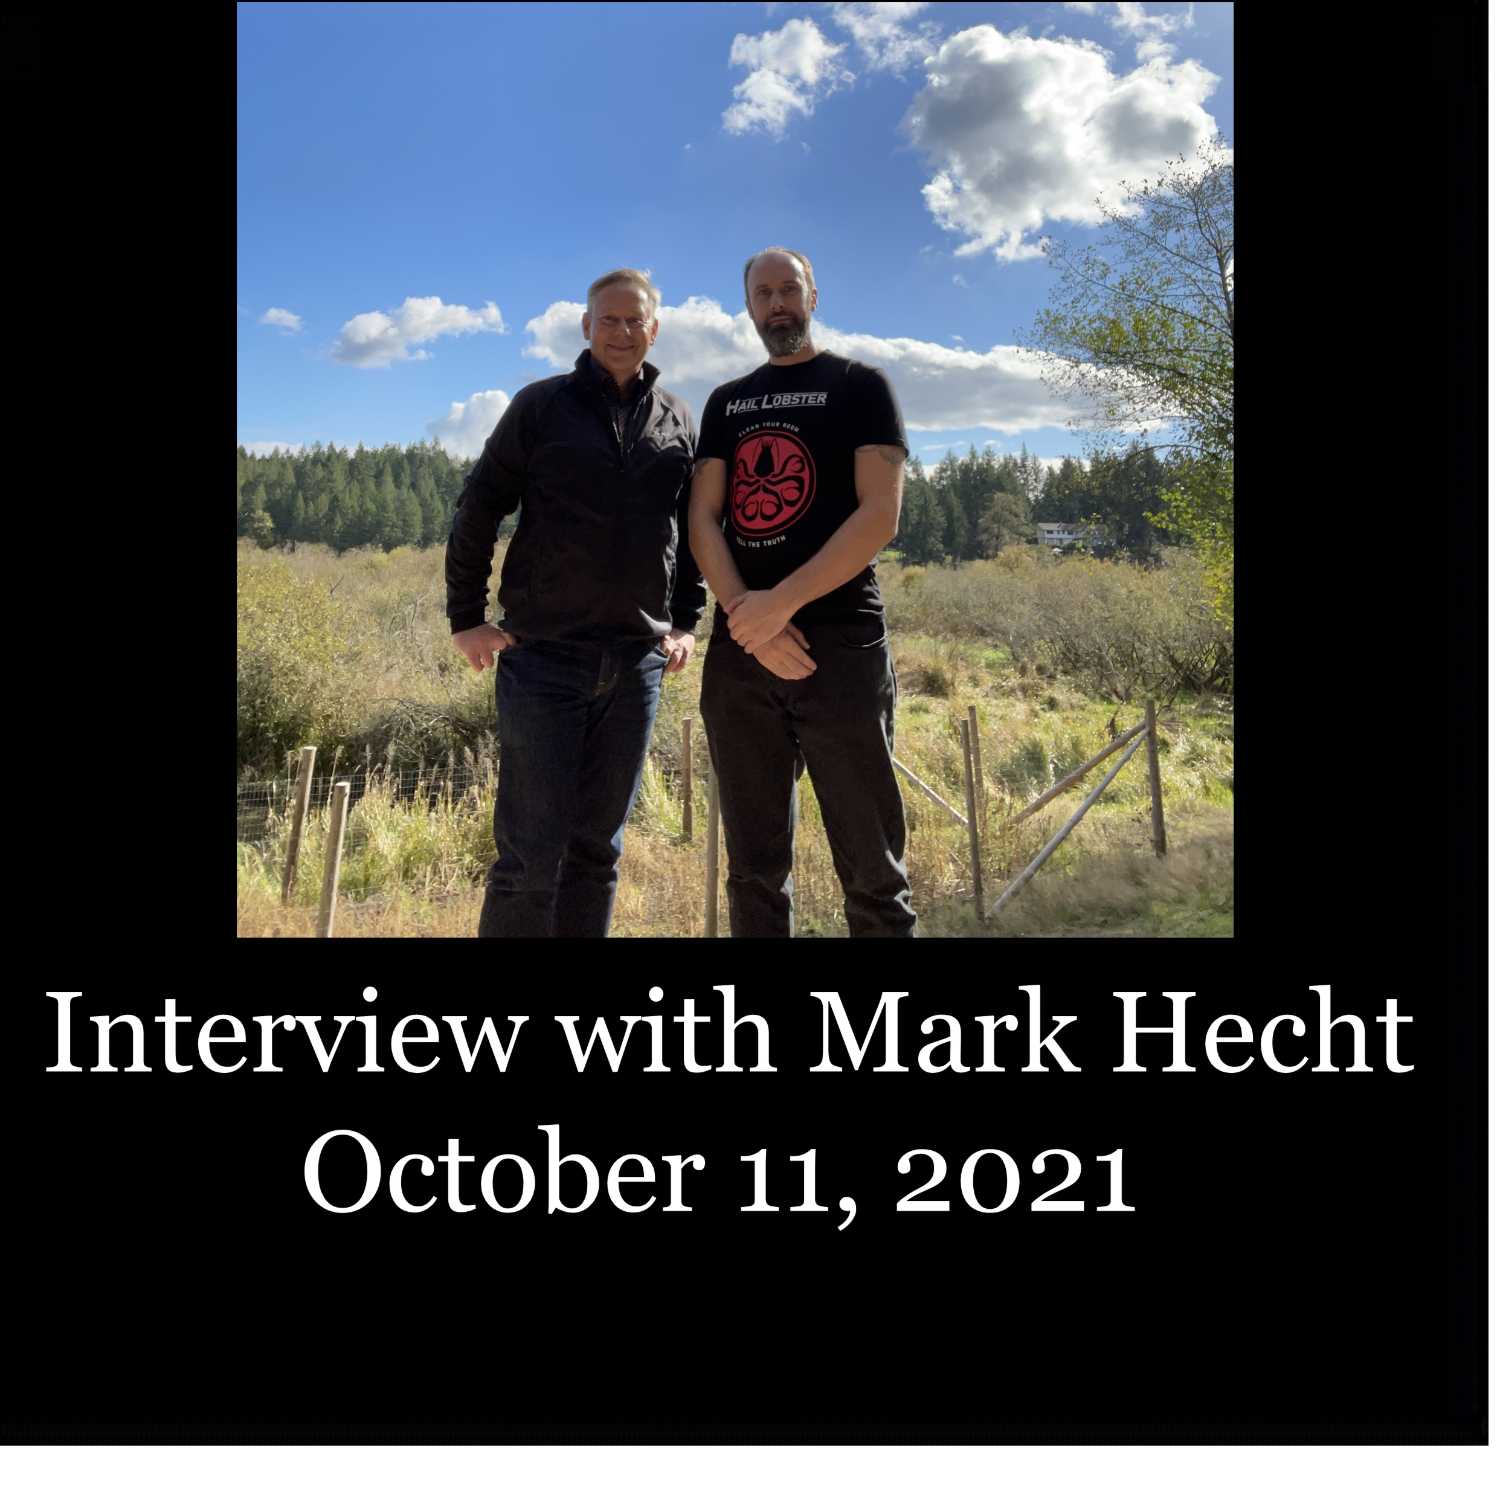 Interview with Mark Hecht October 11, 2021